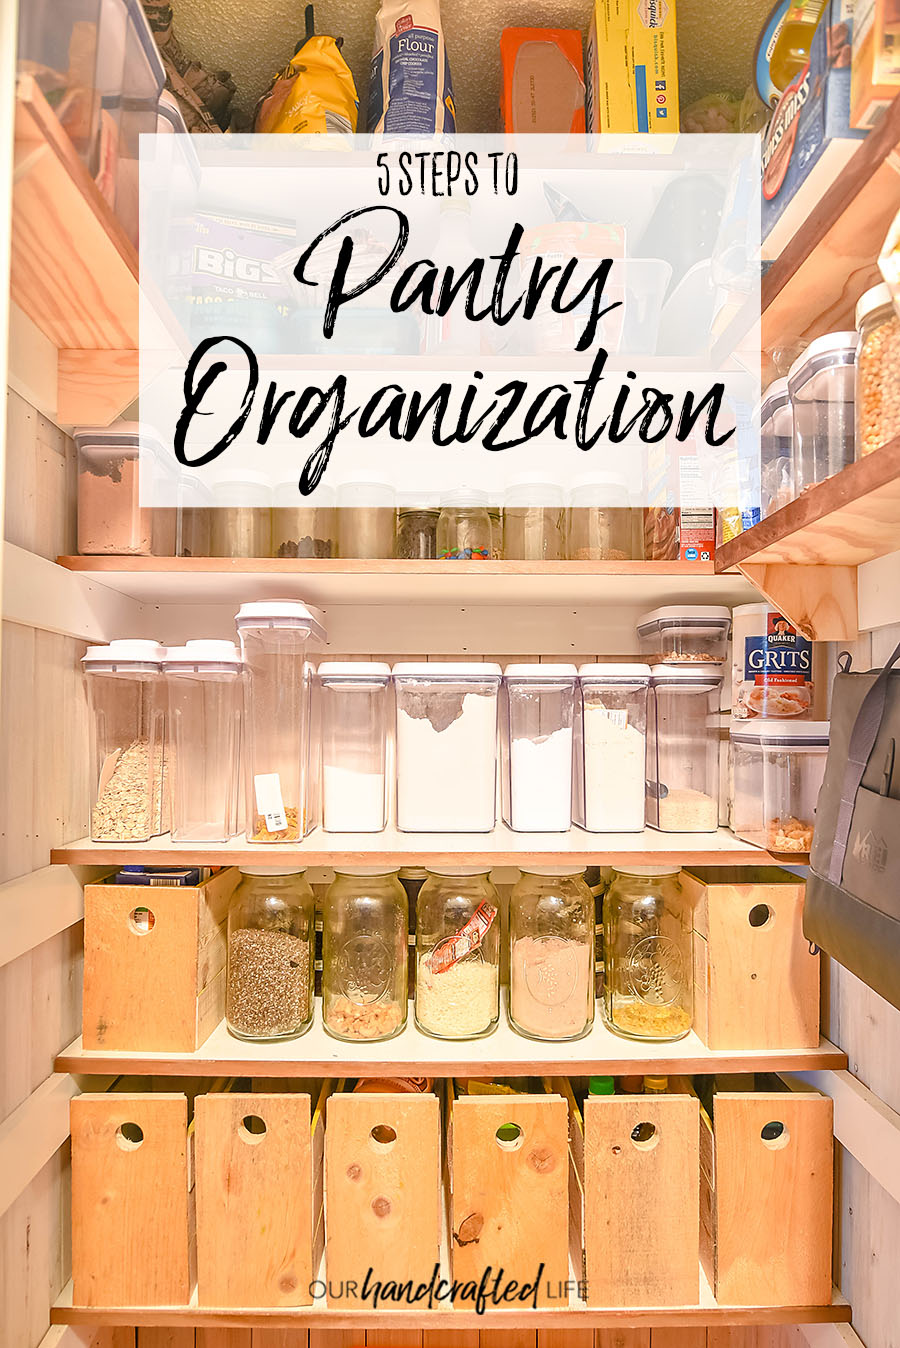 http://ourhandcraftedlife.com/wp-content/uploads/2021/02/5-Steps-to-Pantry-Organization-Our-Handcrafted-Life-Pinterest.jpg